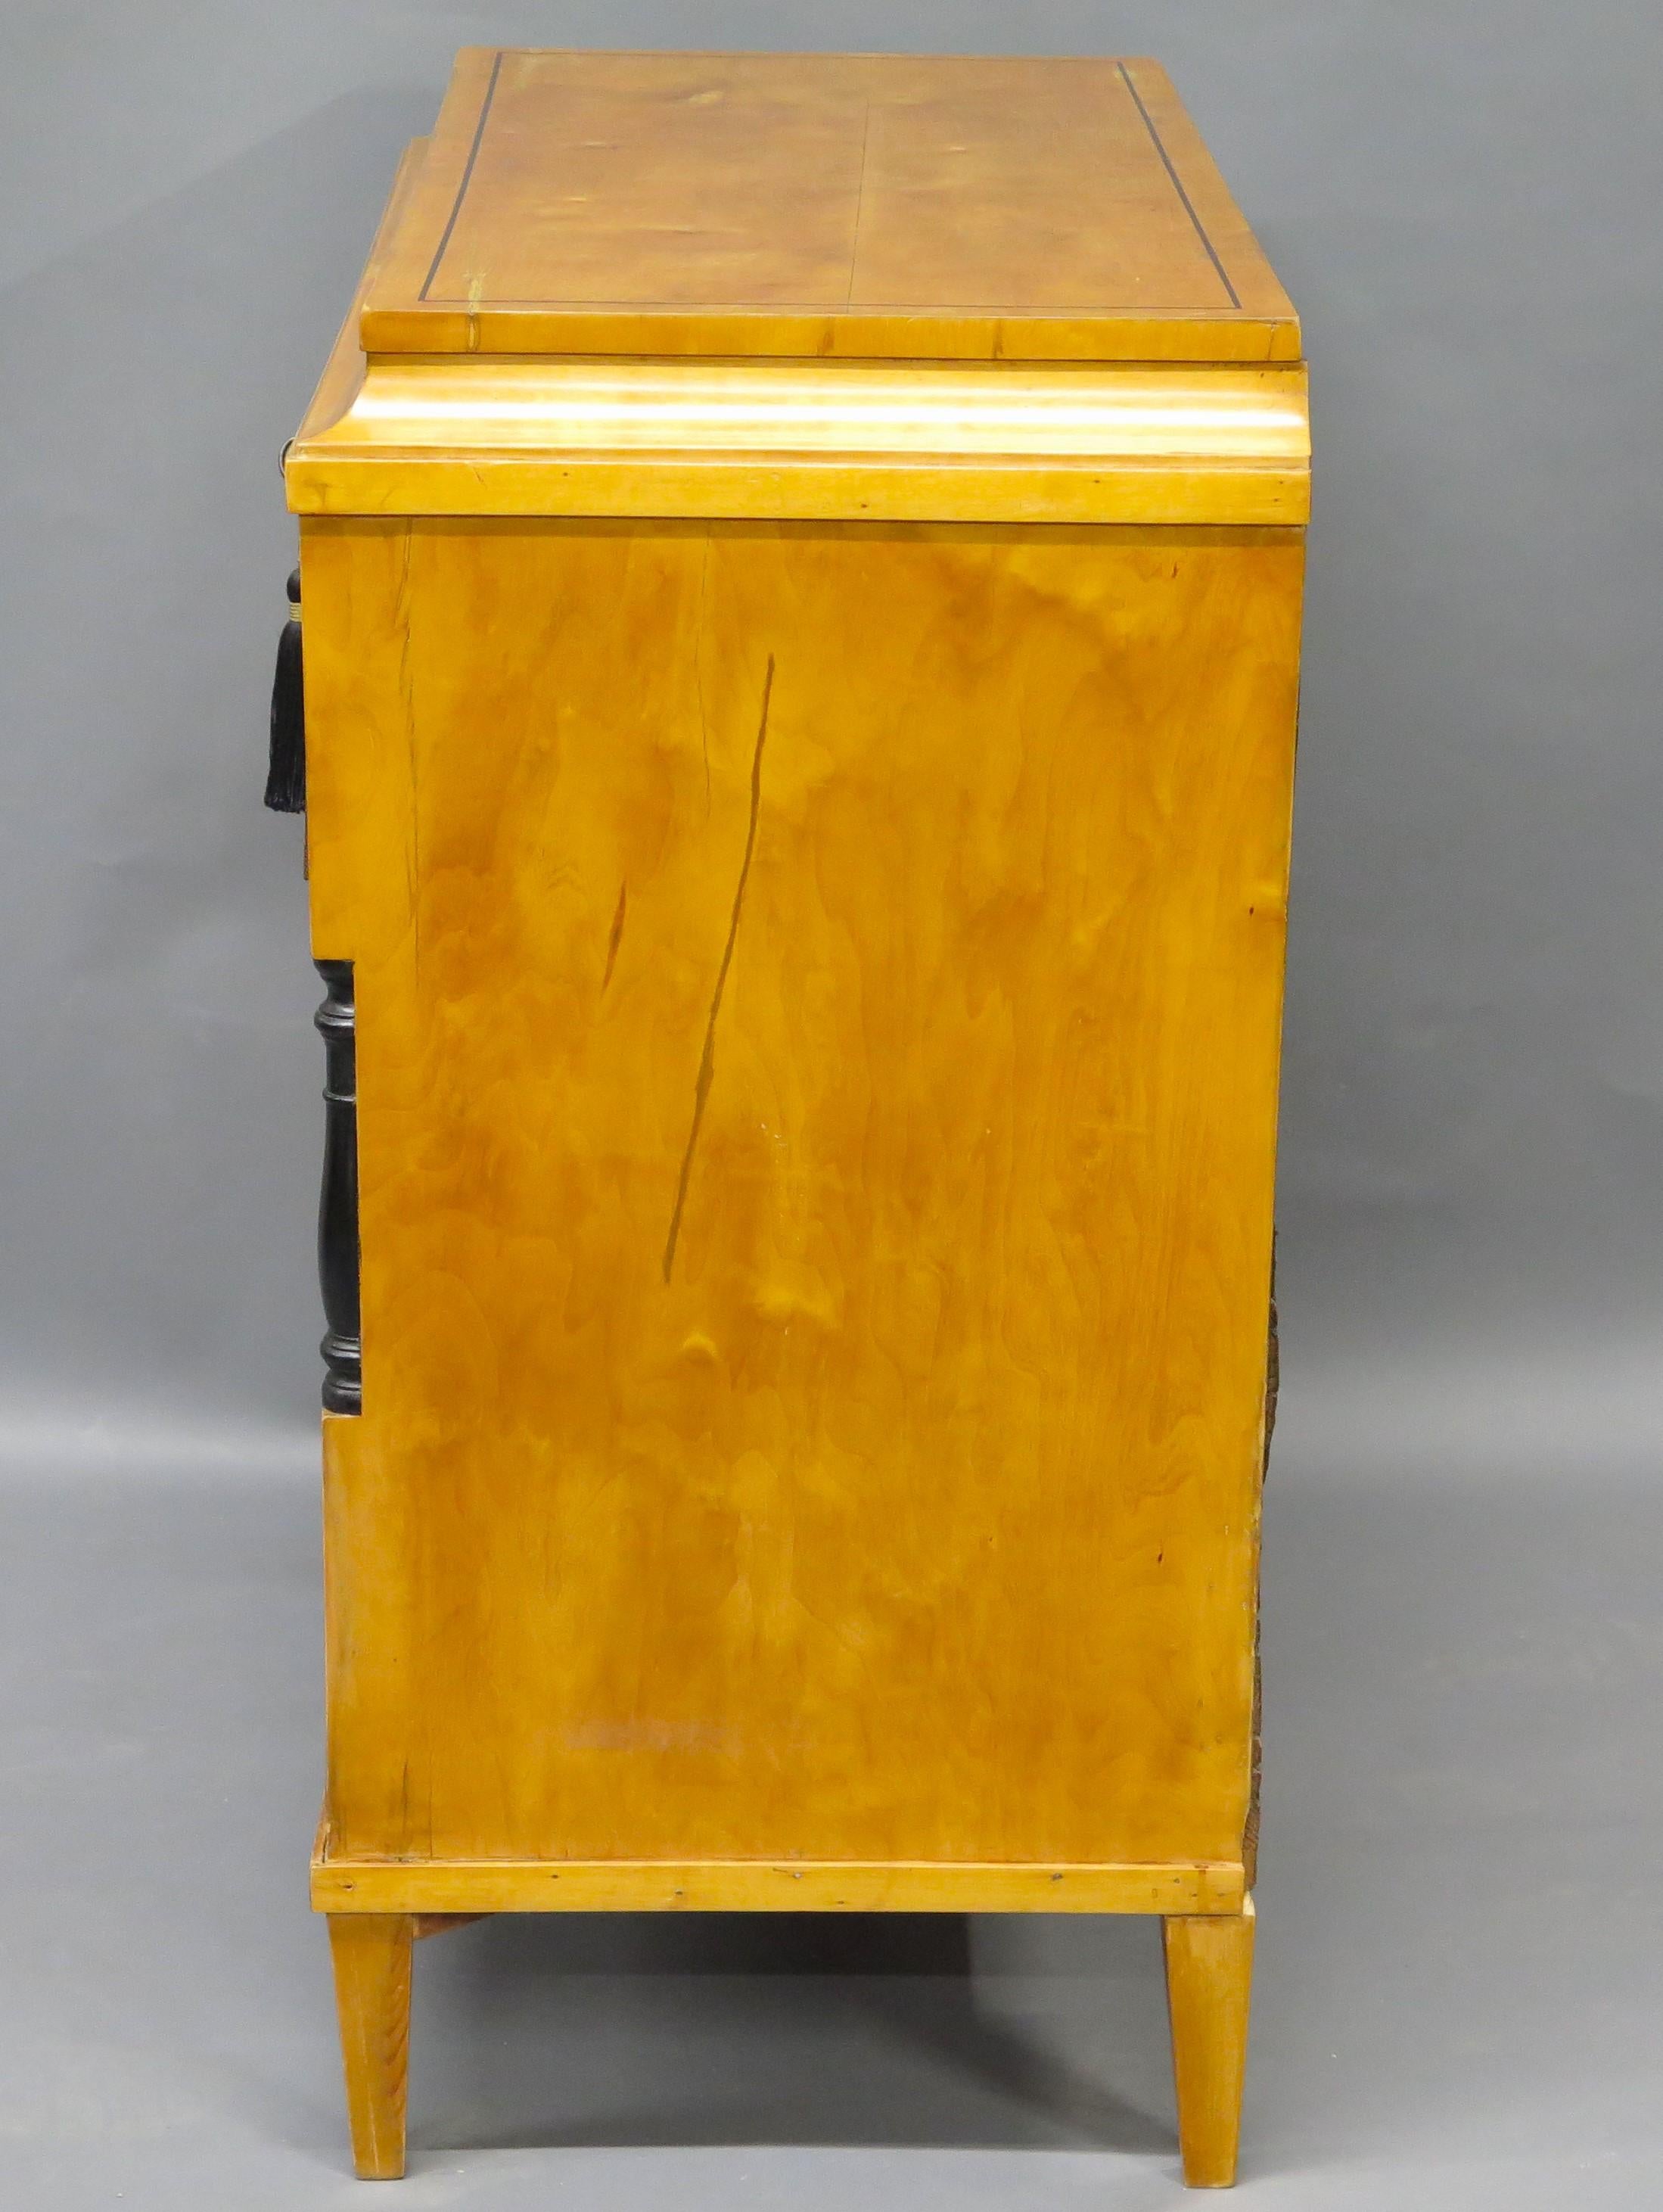 A Biedermeier Inlaid Commode First Half 19th C. In Good Condition For Sale In Dallas, TX